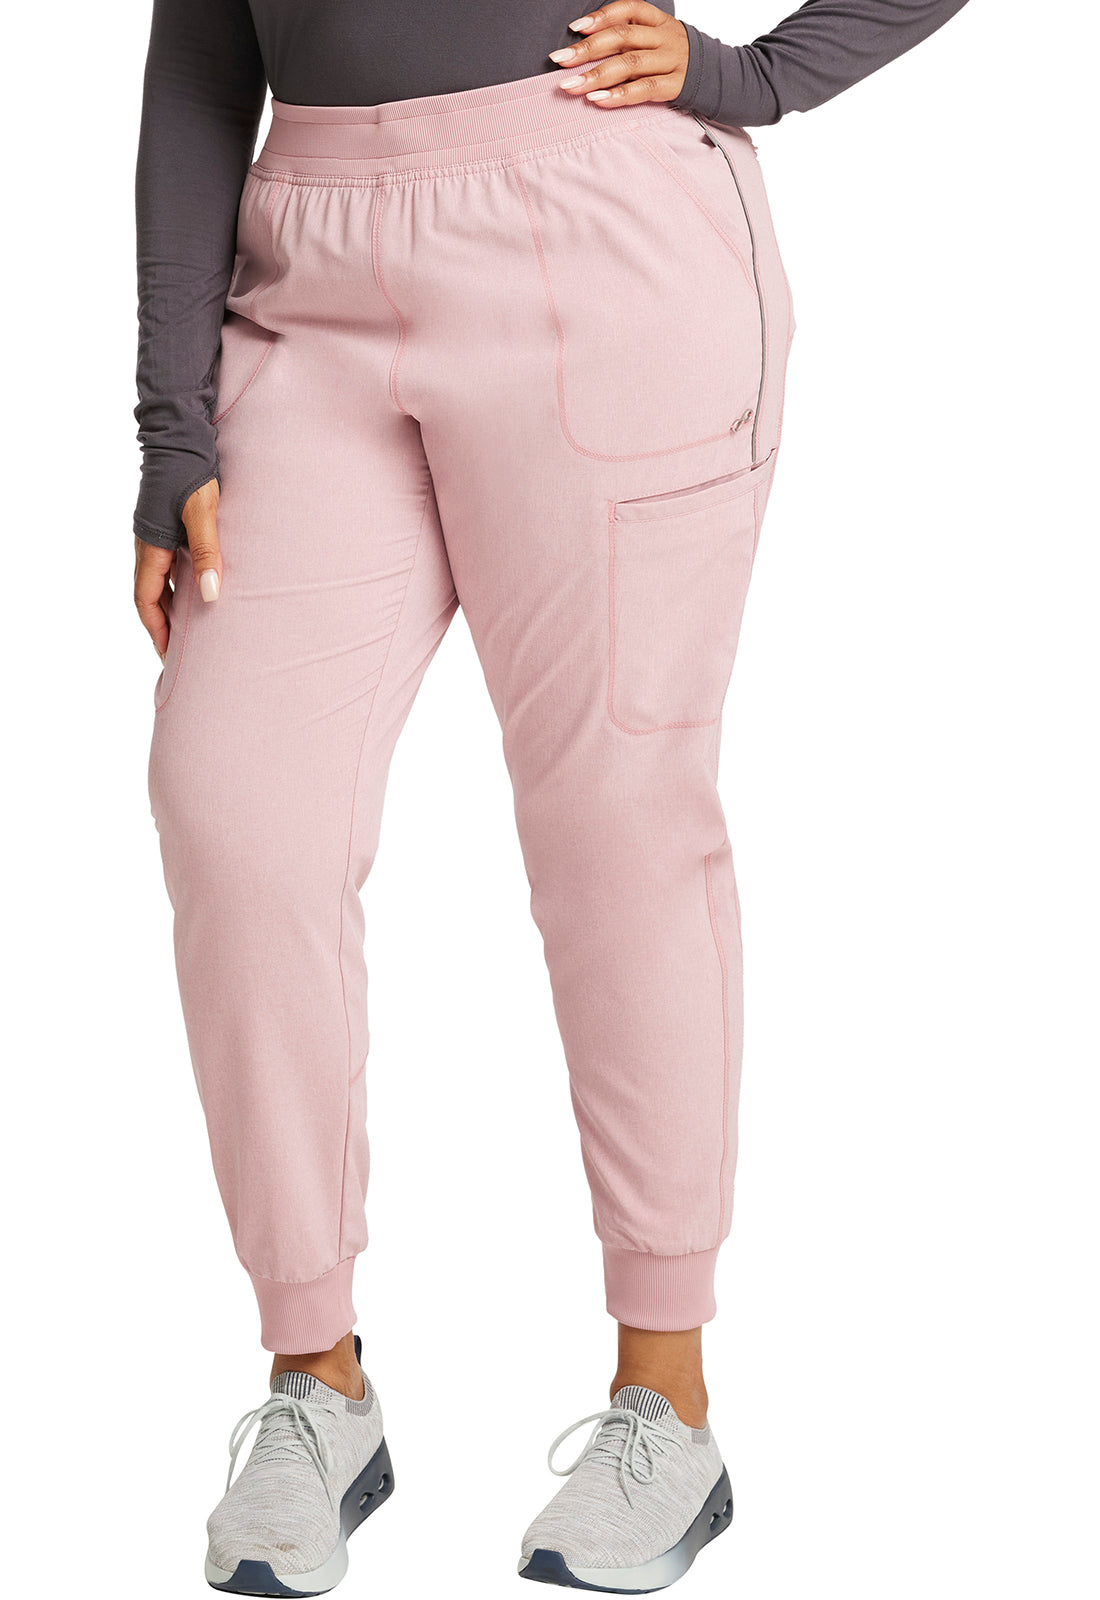 Mid Rise Jogger in Frosted Rose Heather Infinity CK080A FHRS